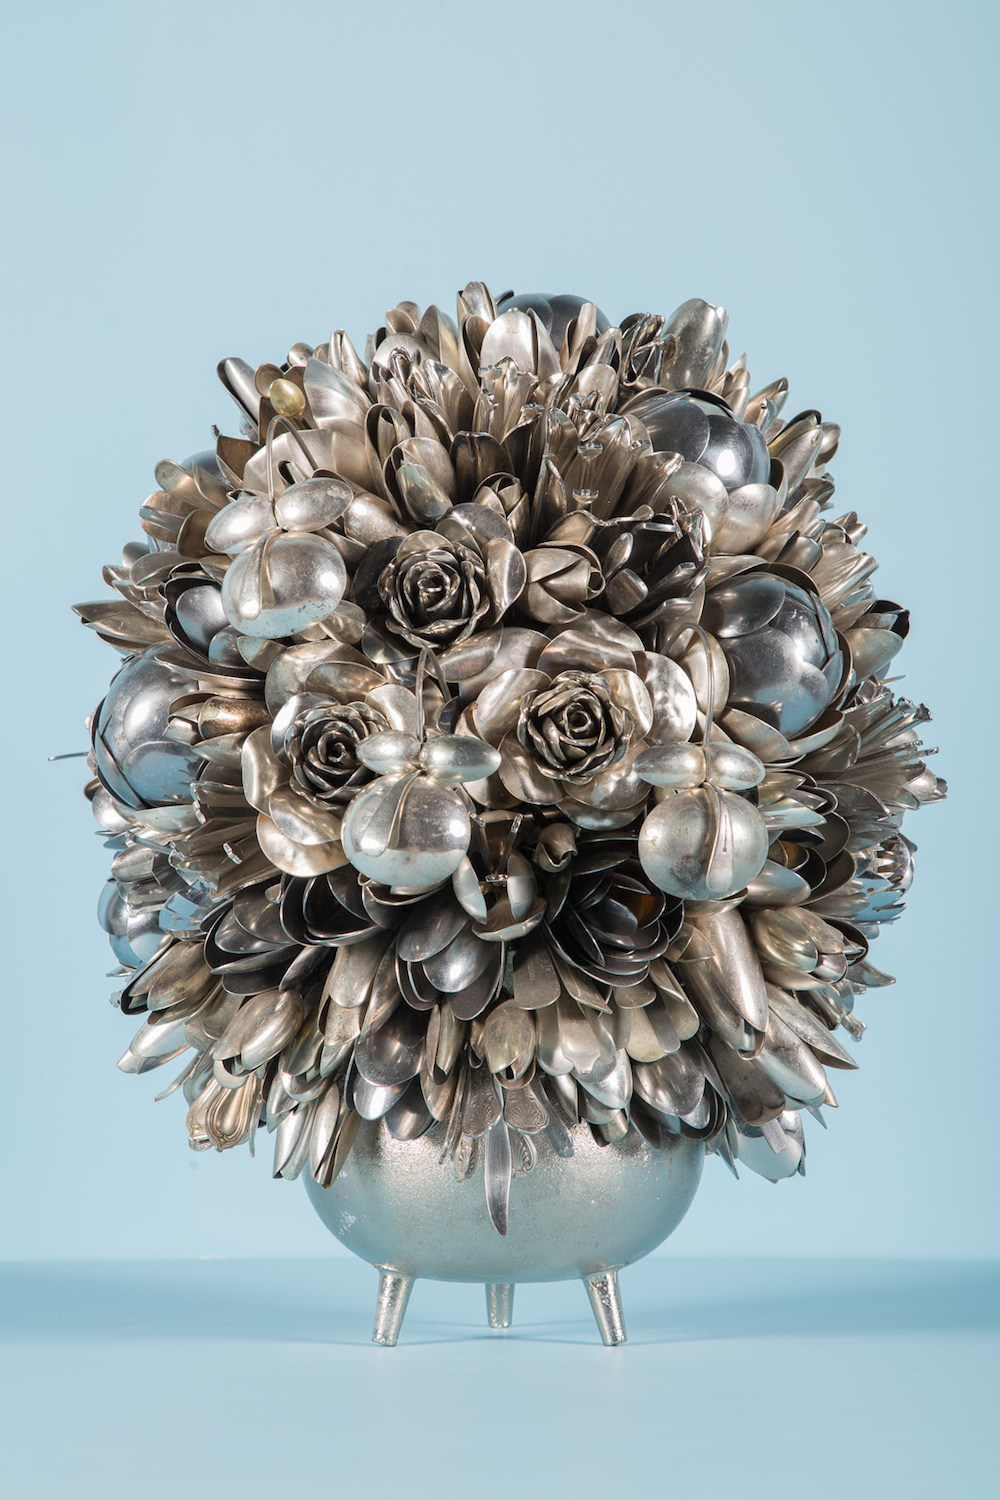 Amazingly Intricate Metal Bouquets Made Of Spare Utensils By Ann Carrington 8